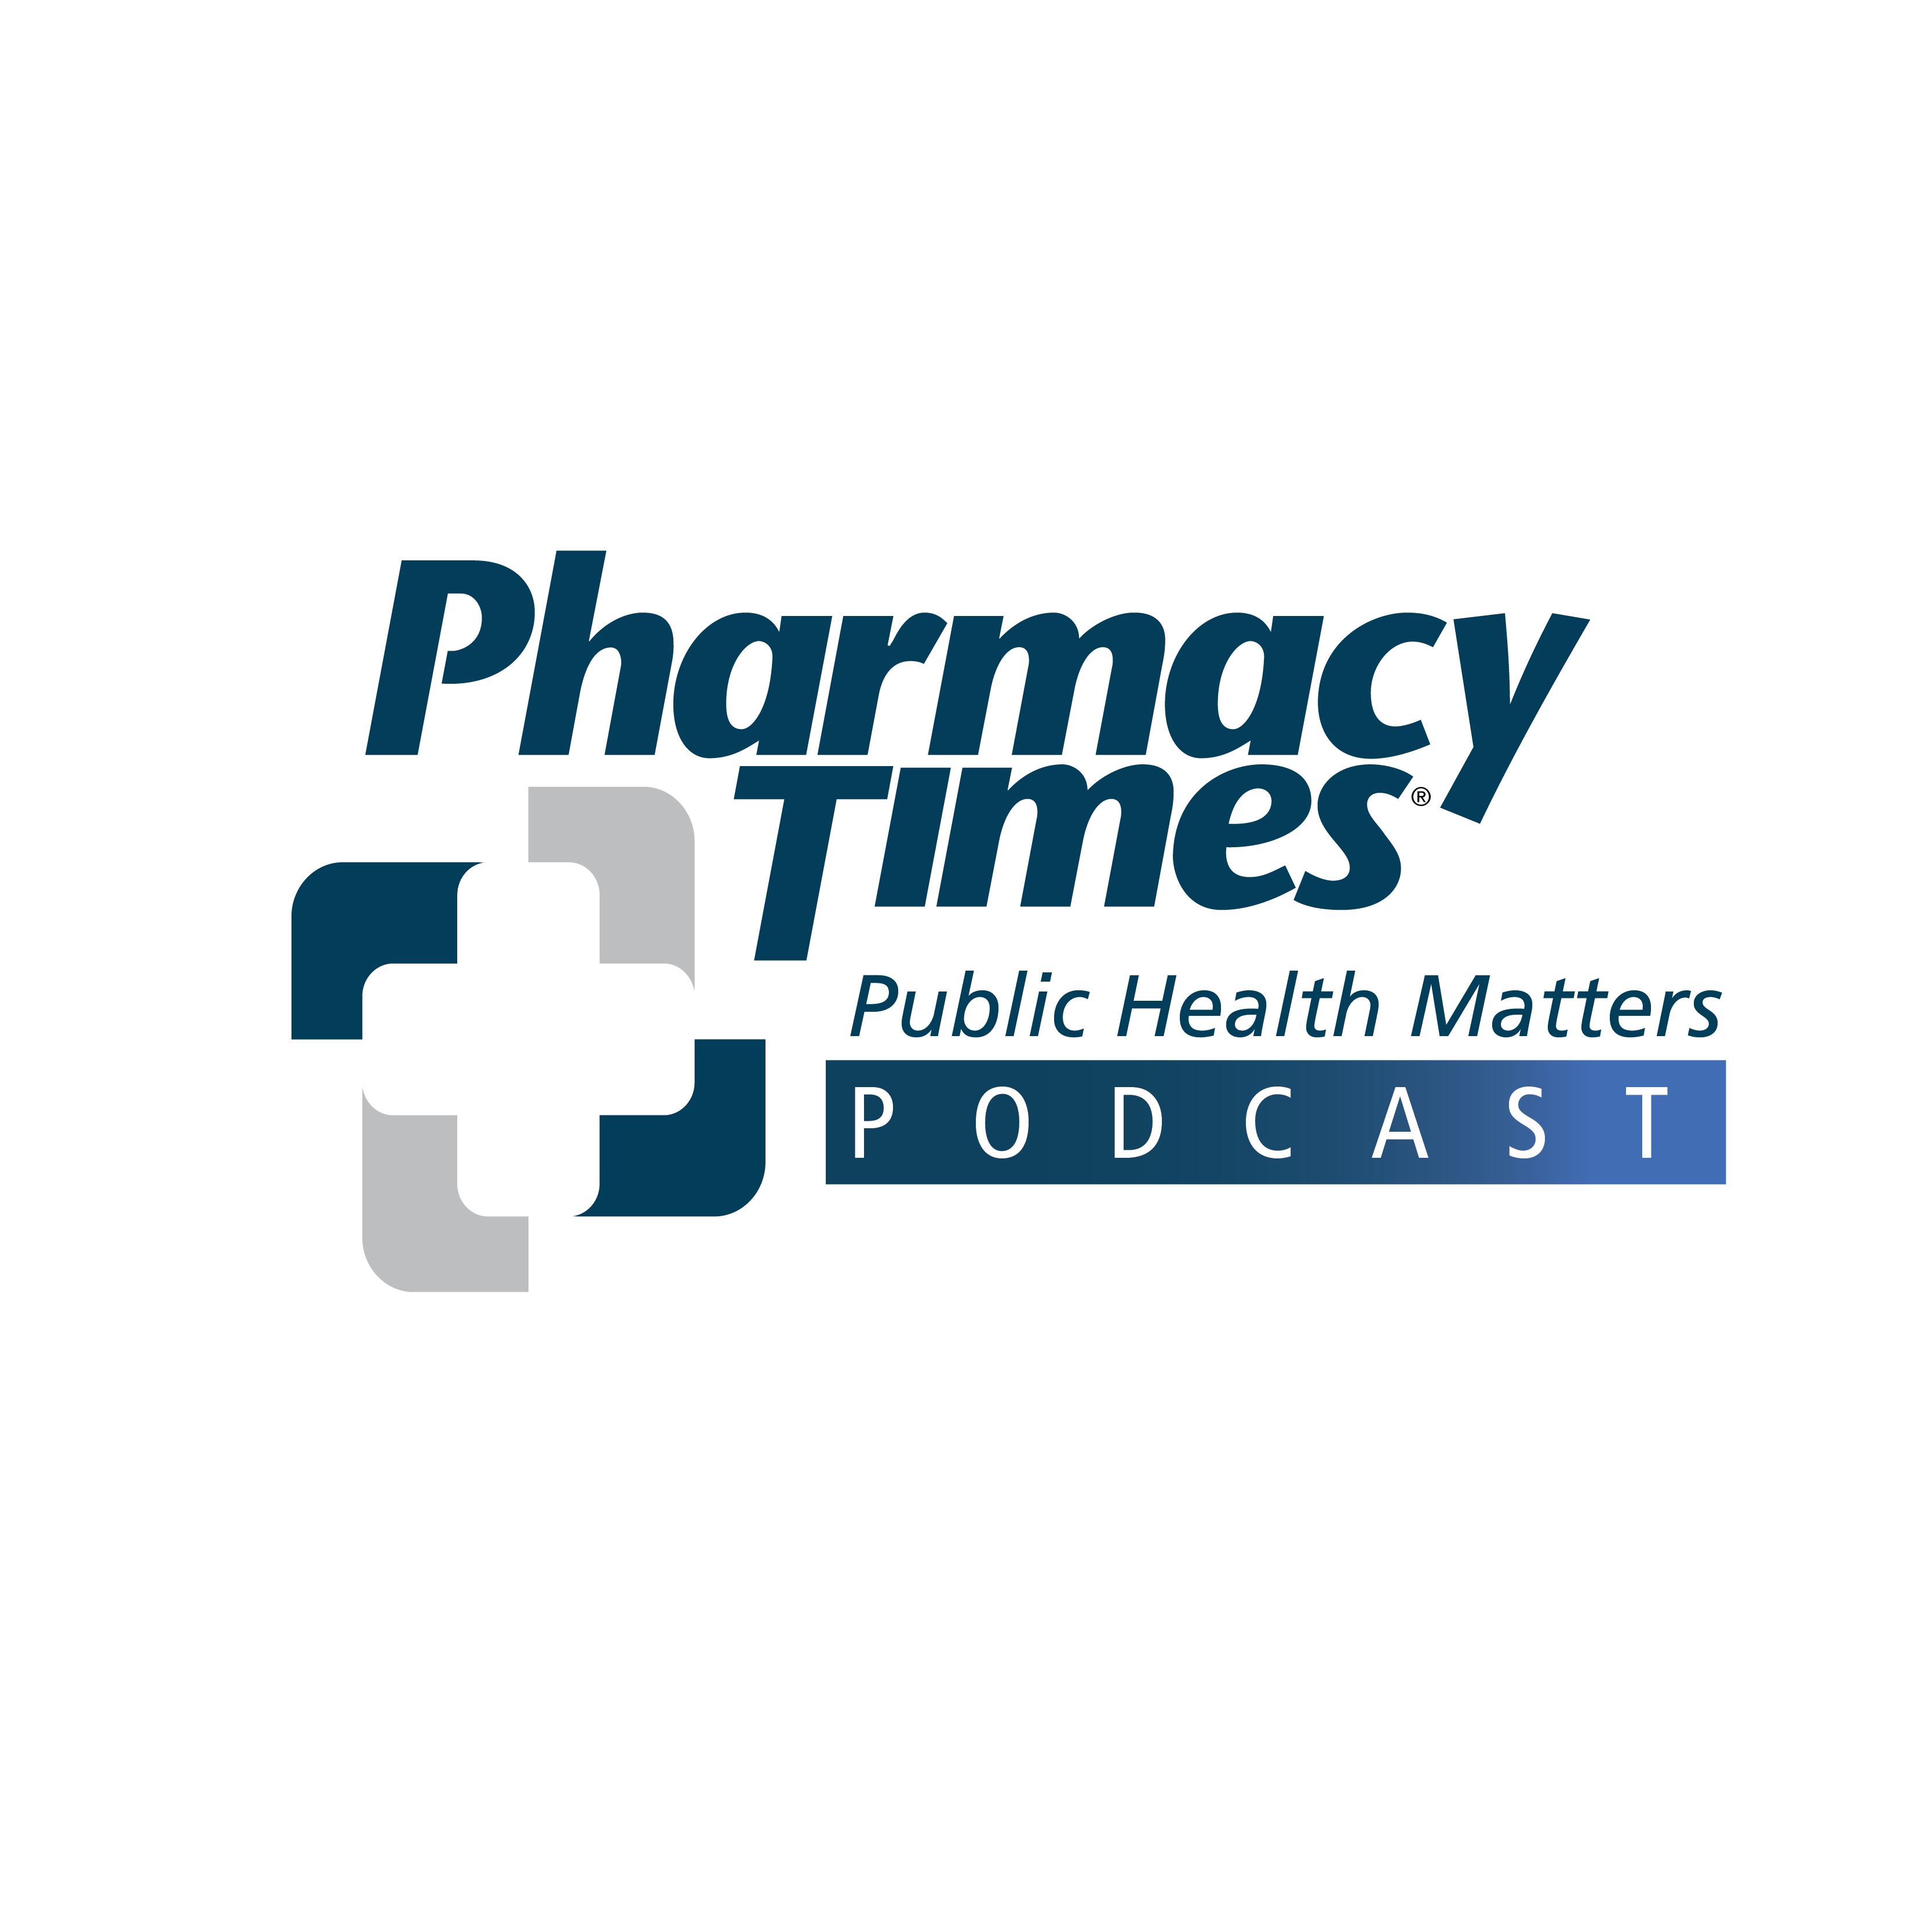 Pharmacy Focus Podcast: New Series- Public Health Matters